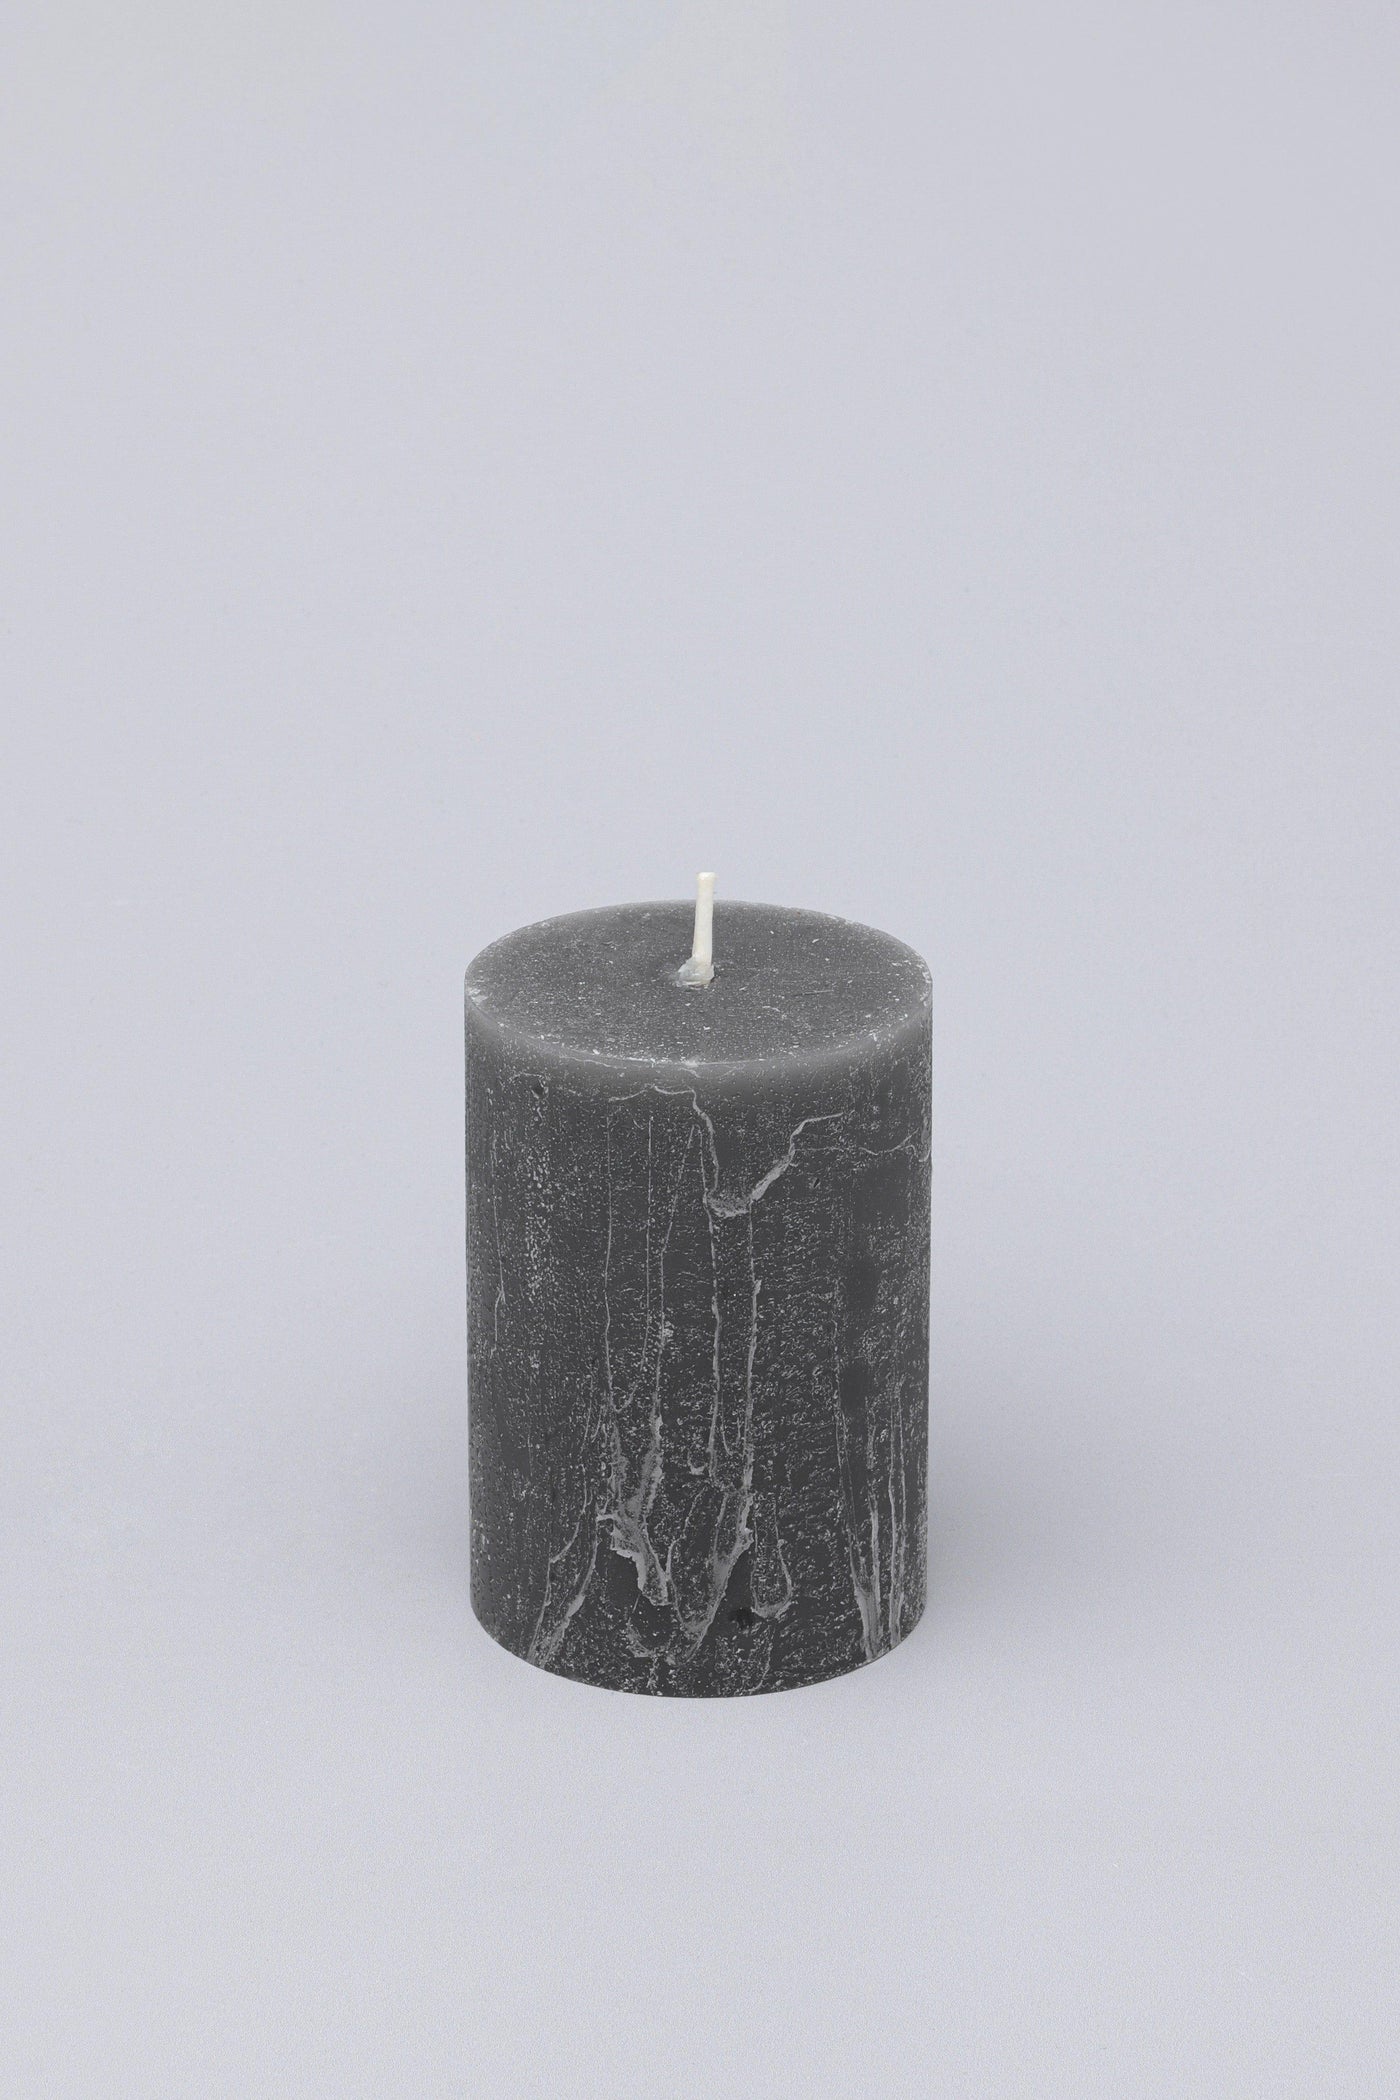 G Decor Candles Grey / Small Scented Marble Modern Dark Grey Lotus, Perfect for Meditation, Pillar Candle